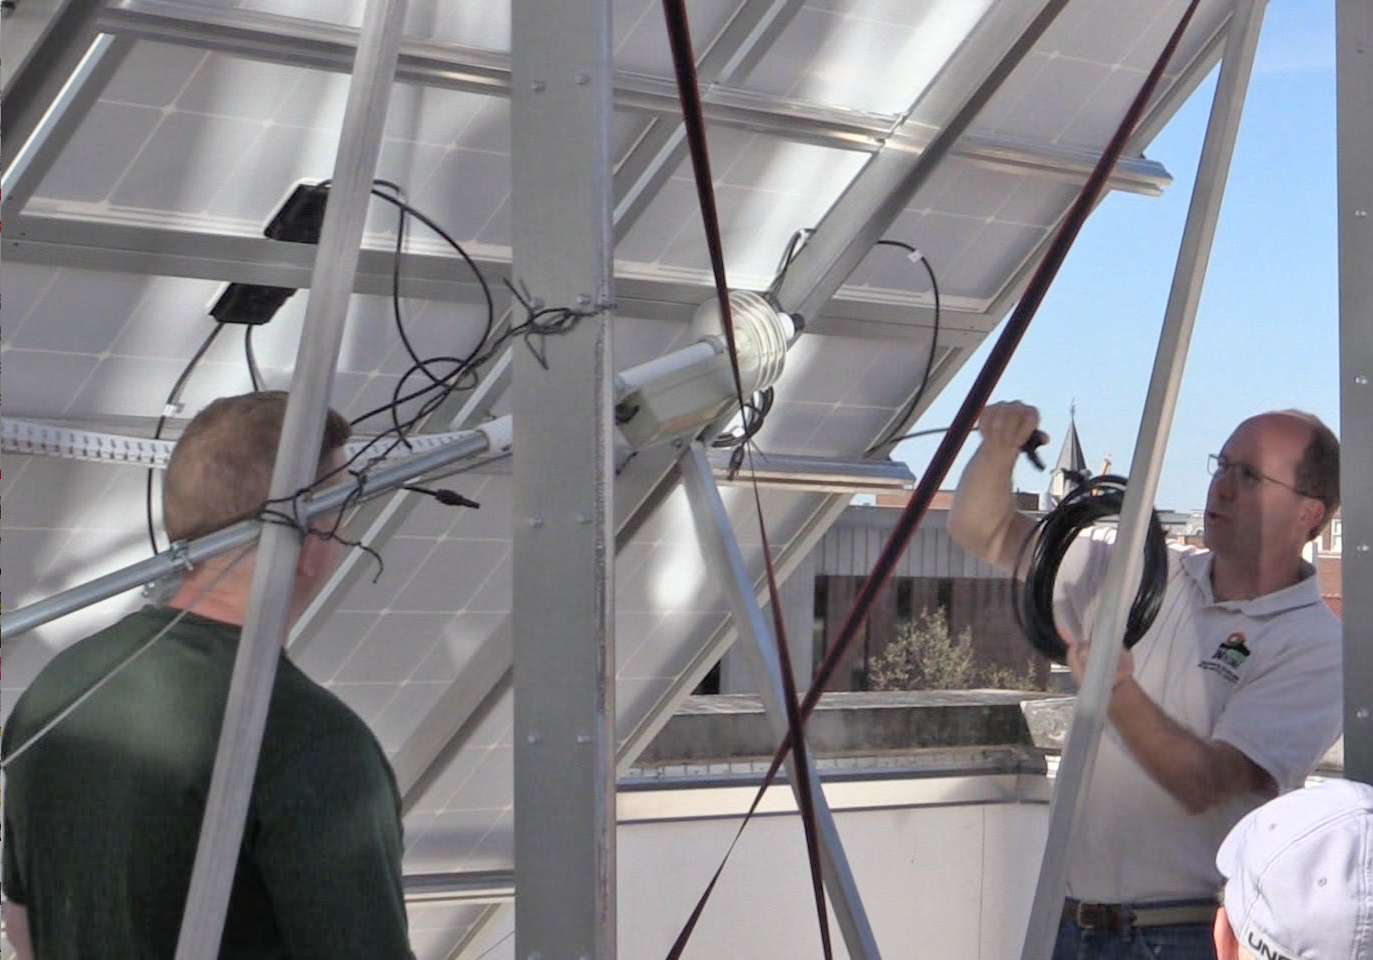 Bill Hutzel (right) discusses the new array's plug-and-play electrical connections with the installation team